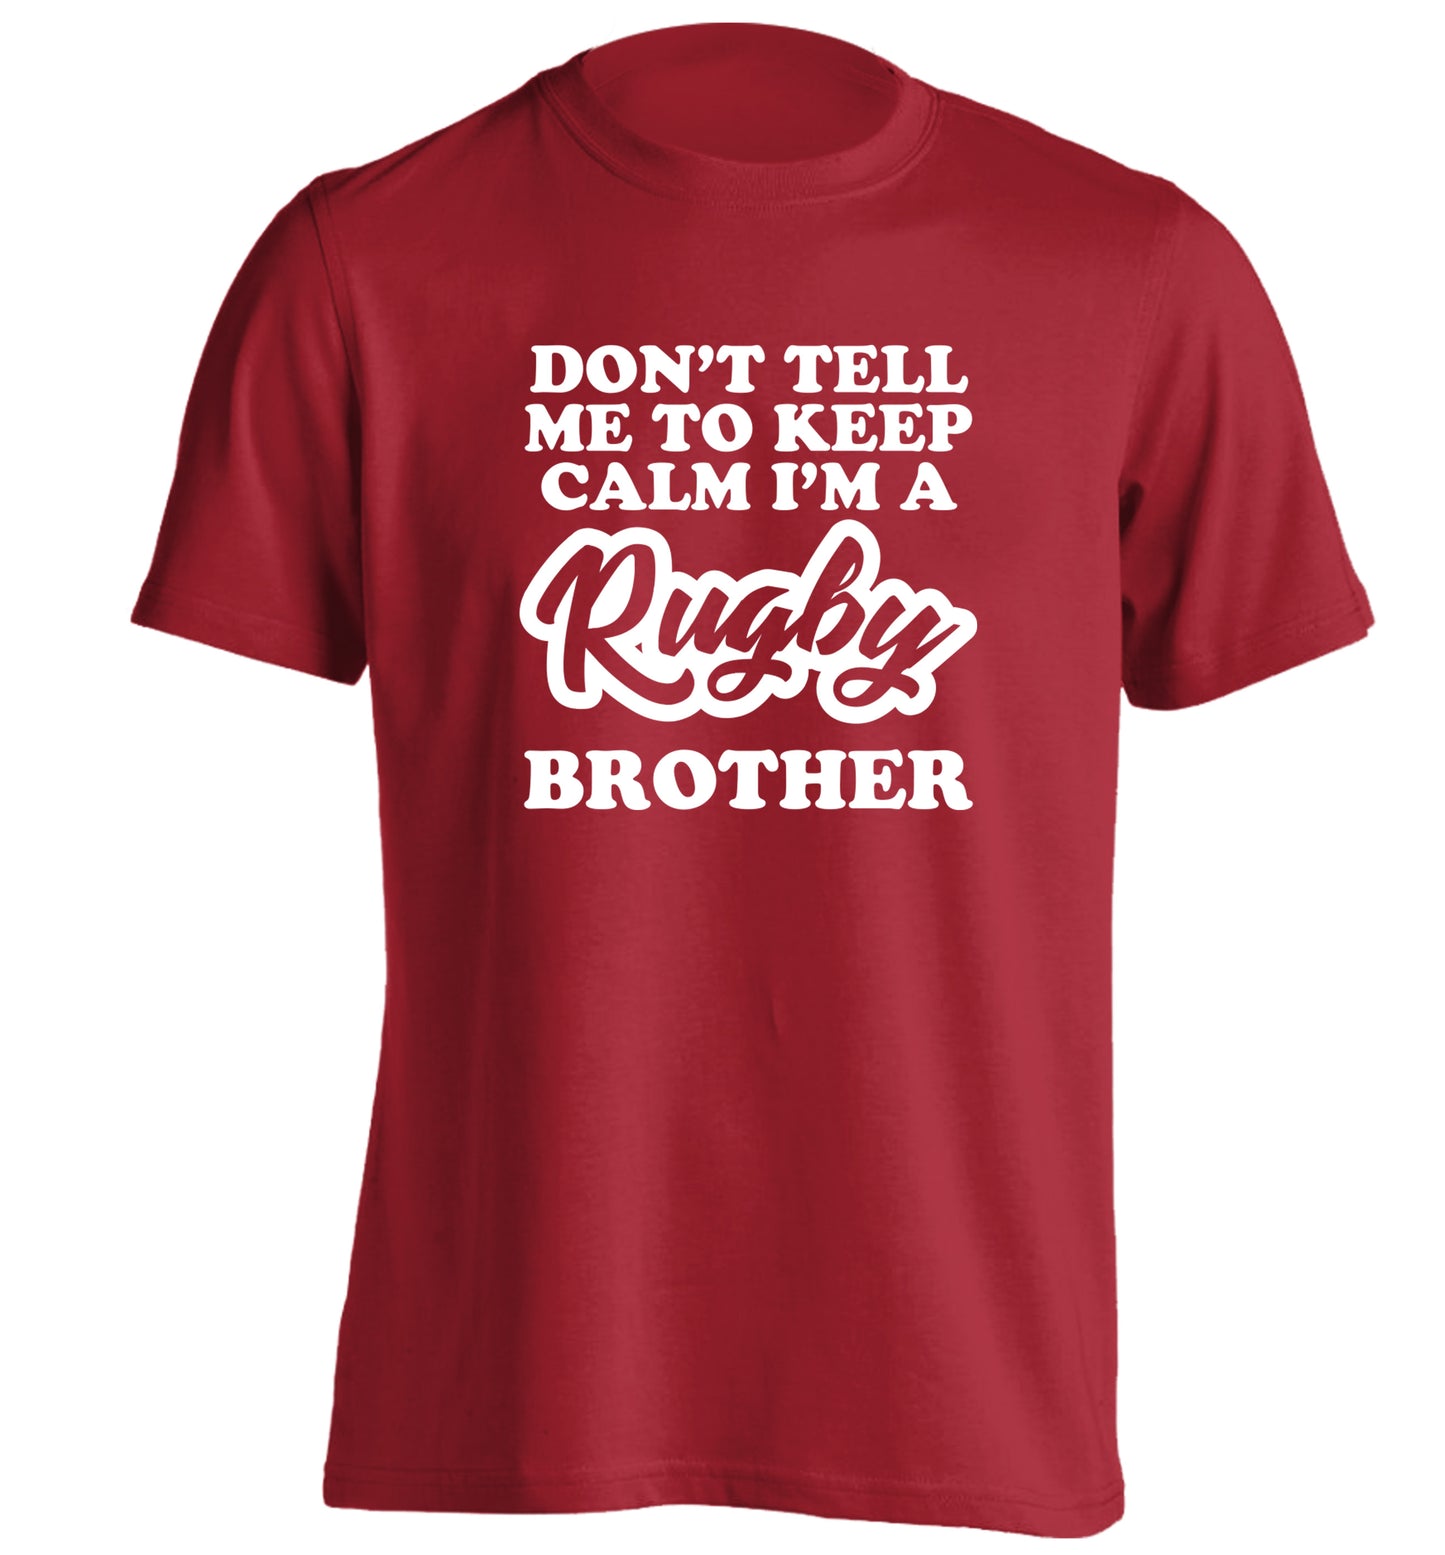 Don't tell me keep calm I'm a rugby brother adults unisex red Tshirt 2XL